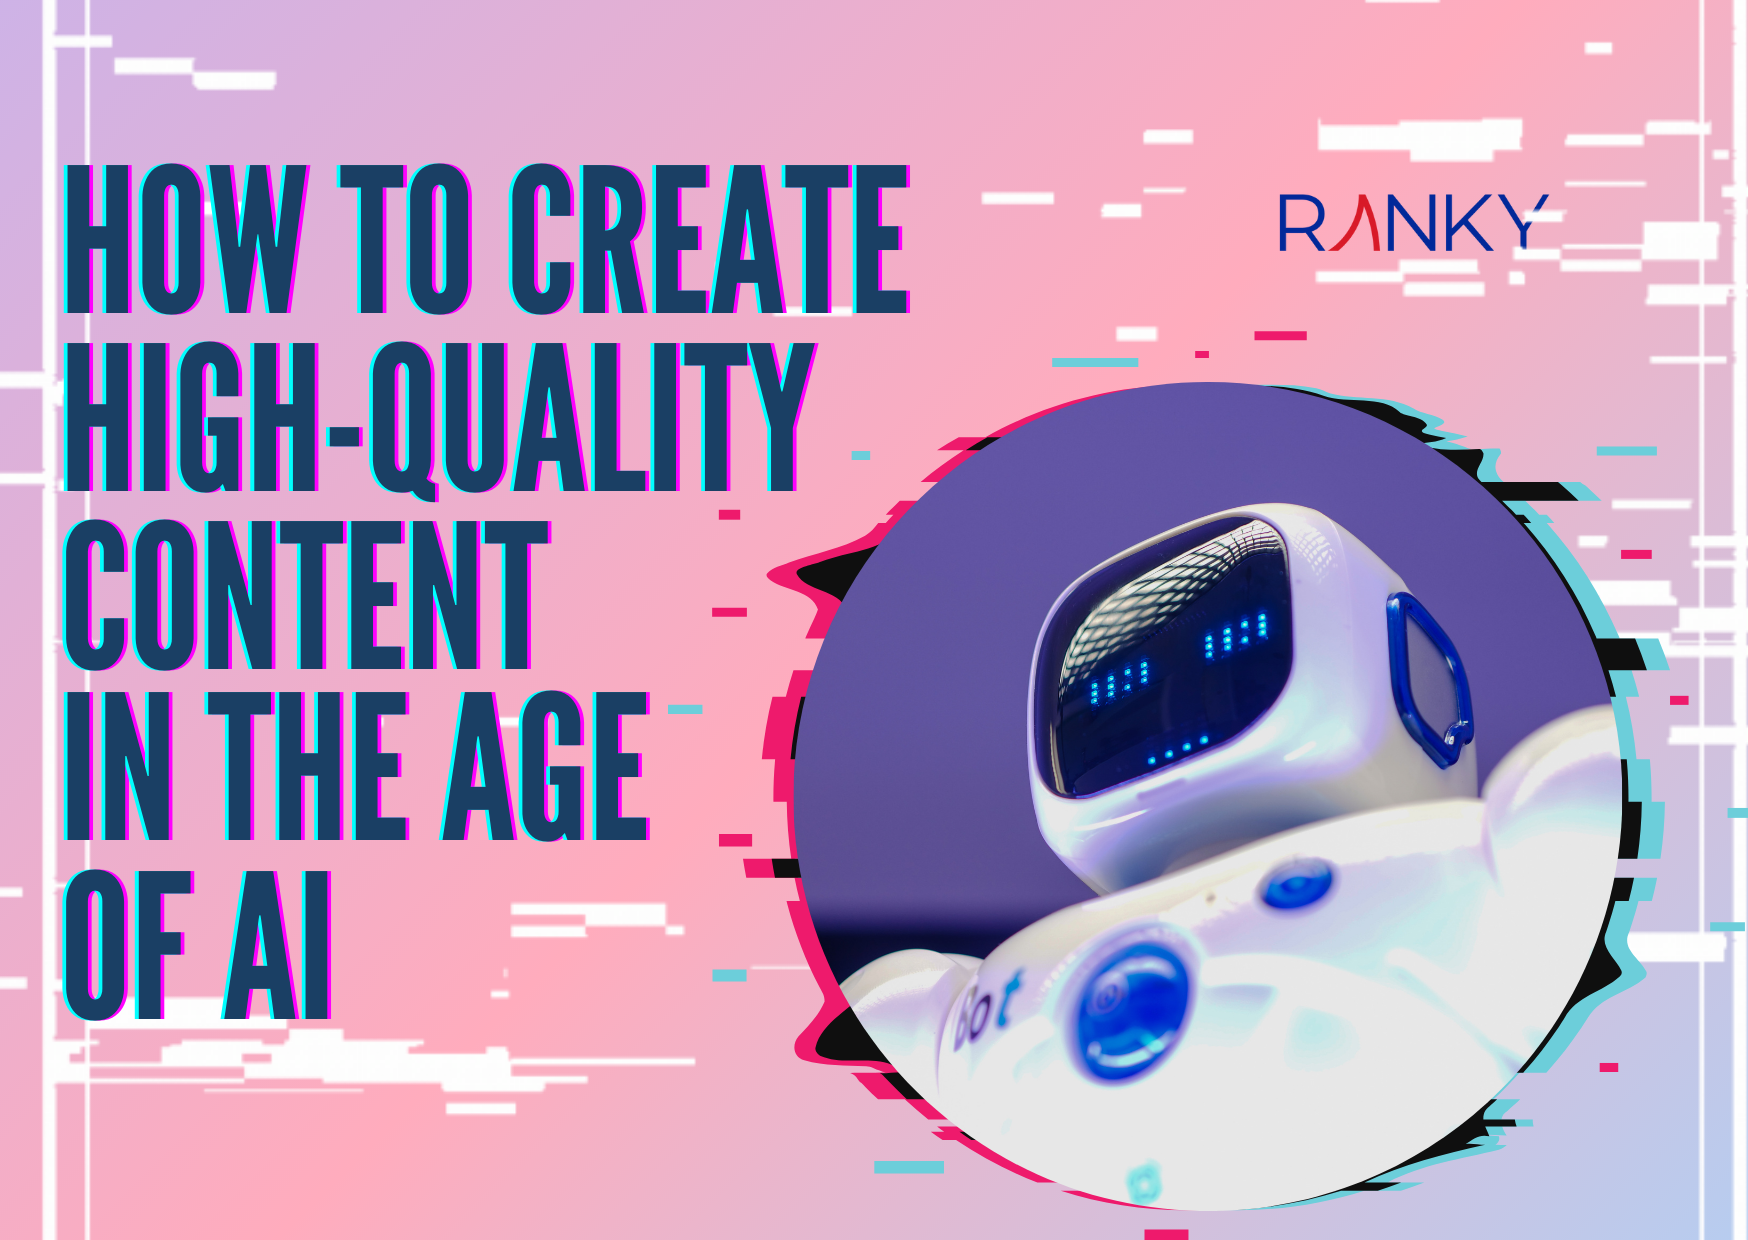 How To Create High-Quality Content In the Age of AI